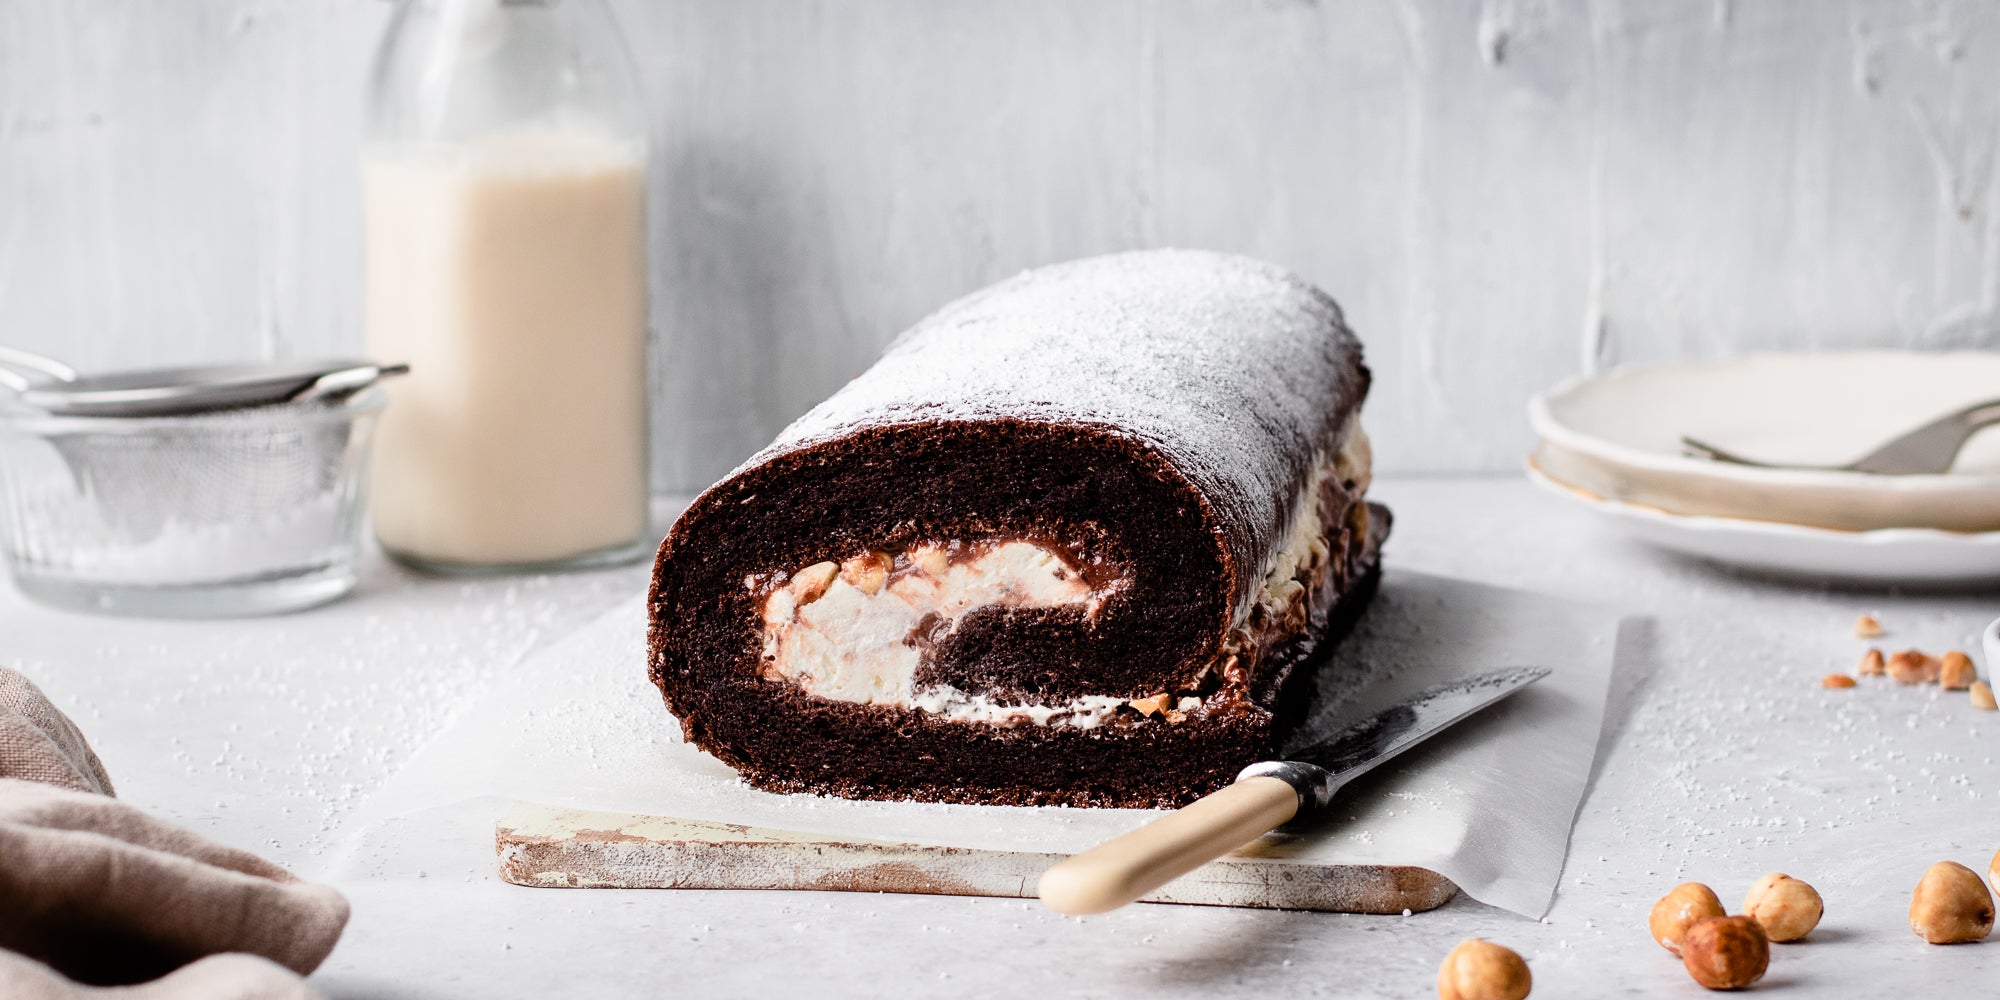 Chocolate Roulade ready to serve on a serving board, next to a knife. With a bottle of milk in the background